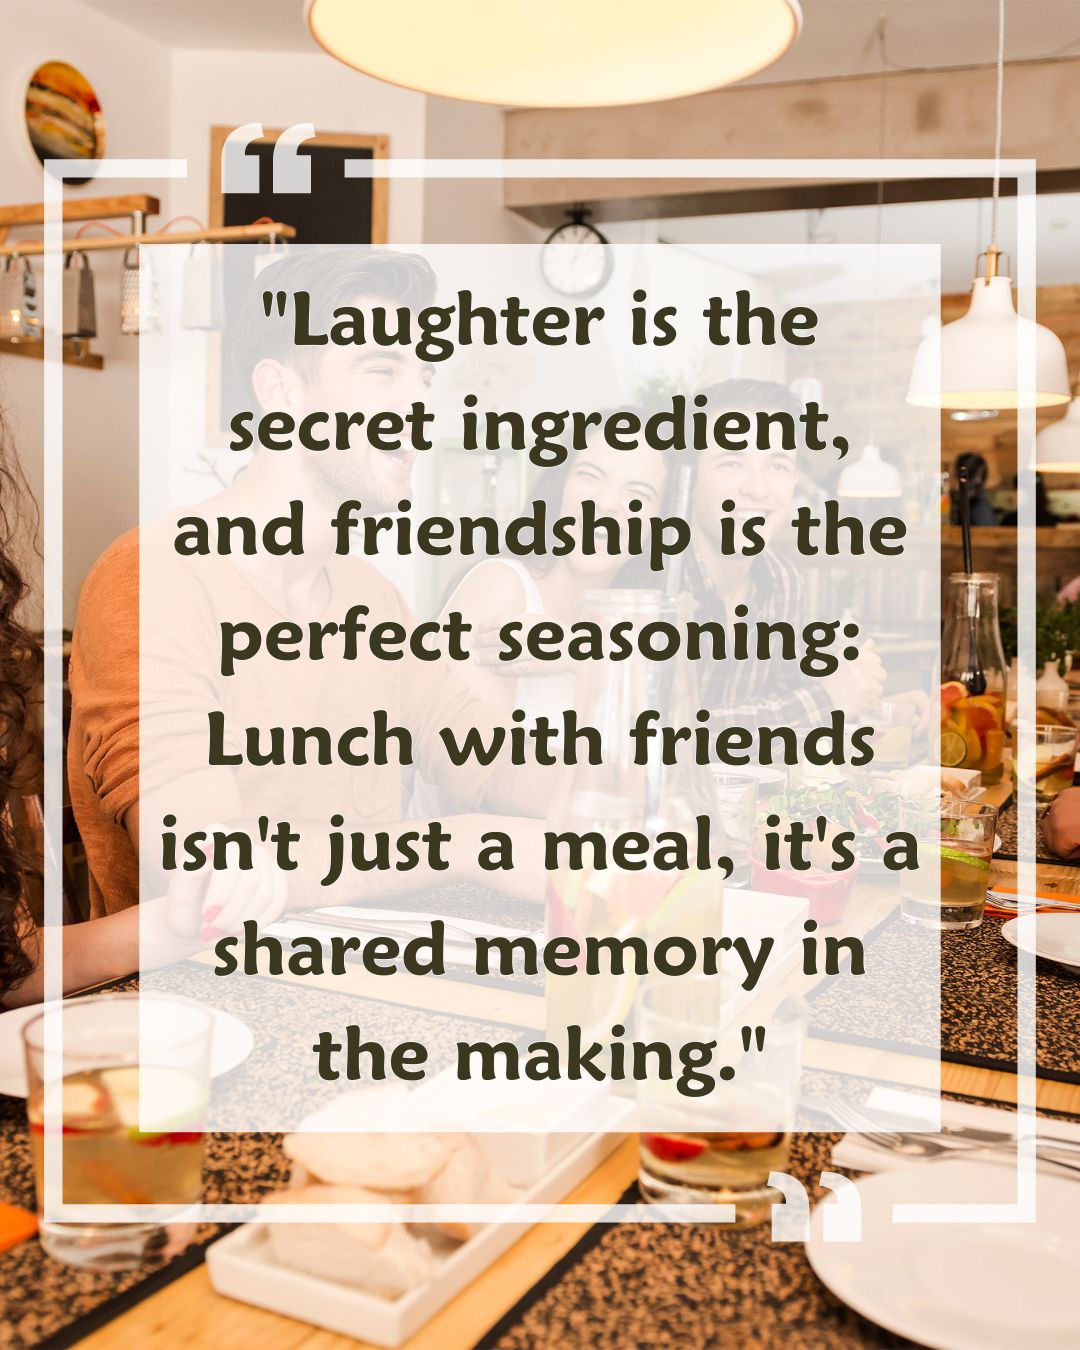 eating lunch with friends quotes with Images 4